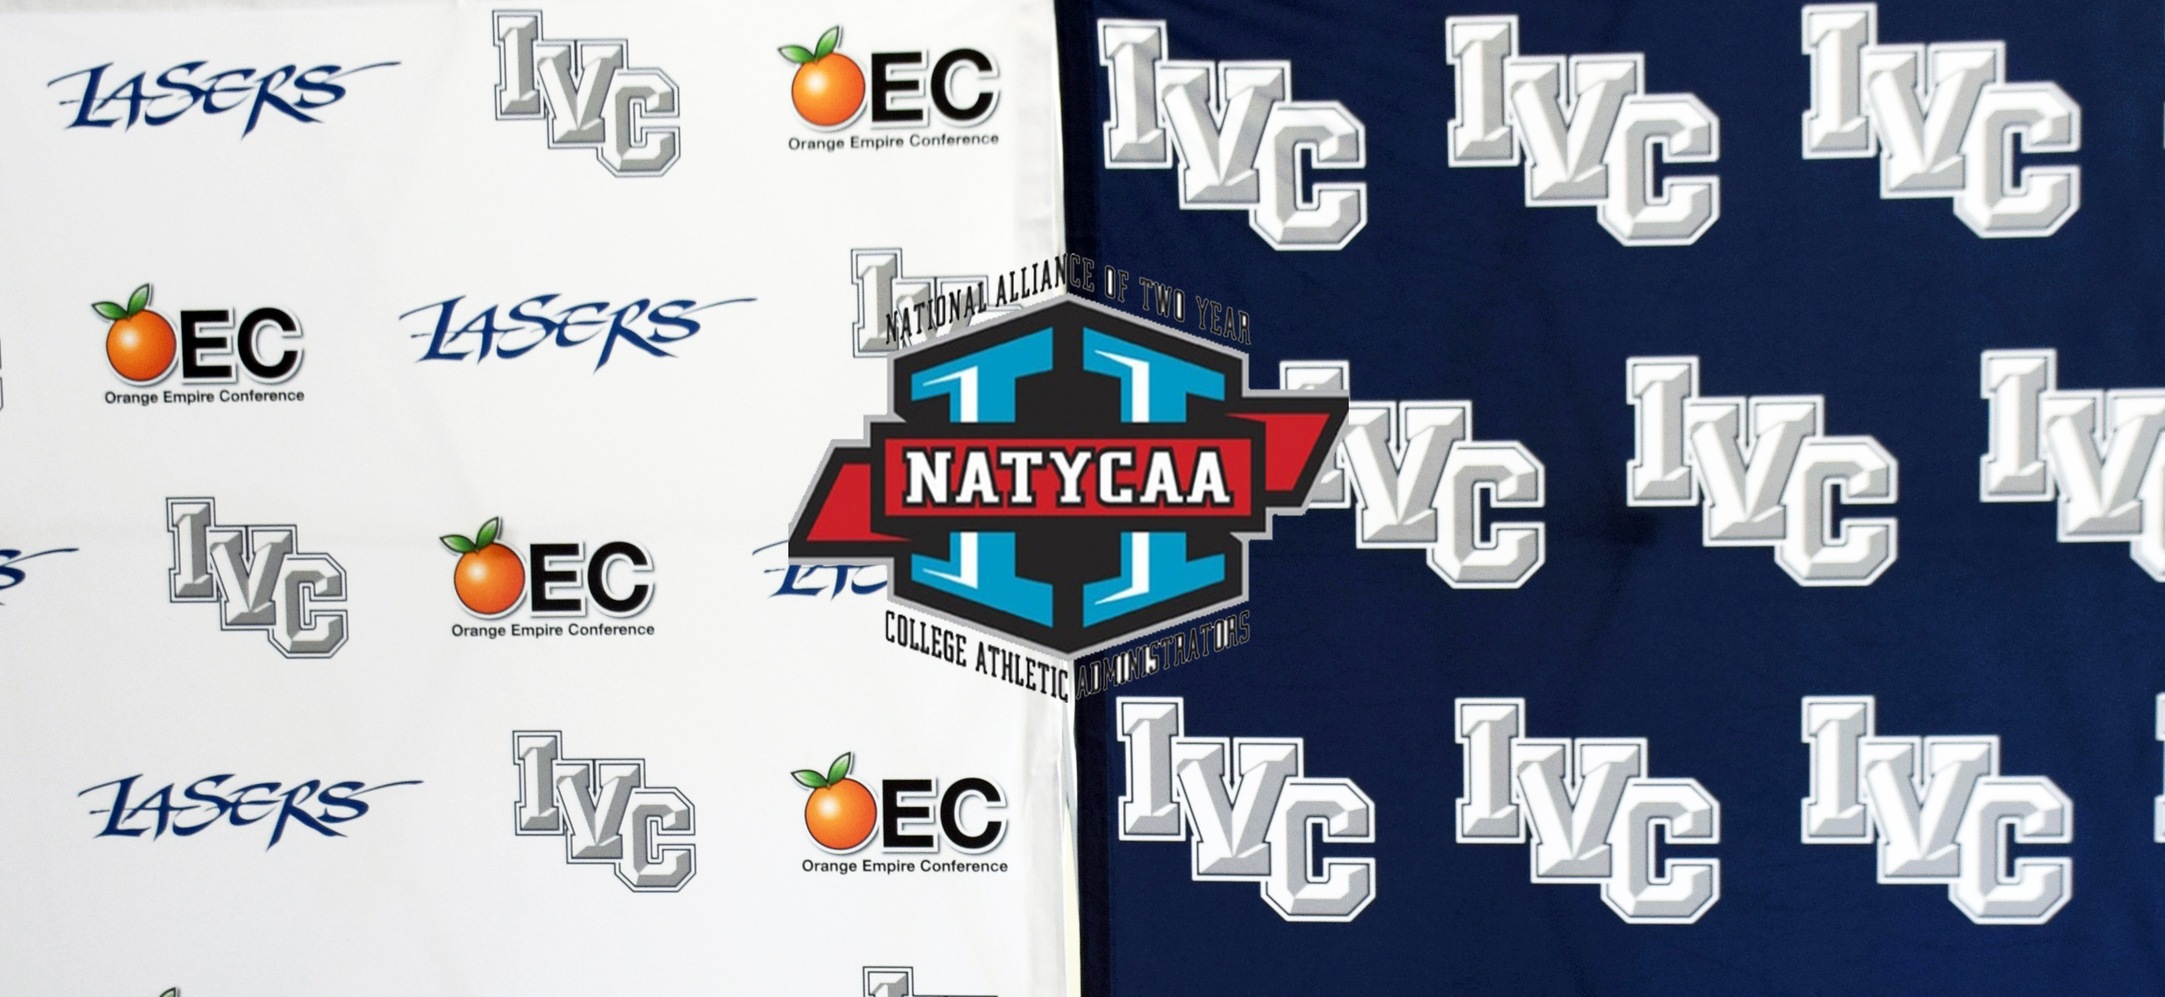 IVC athletics takes 14th in NATYCAA State Associations Division